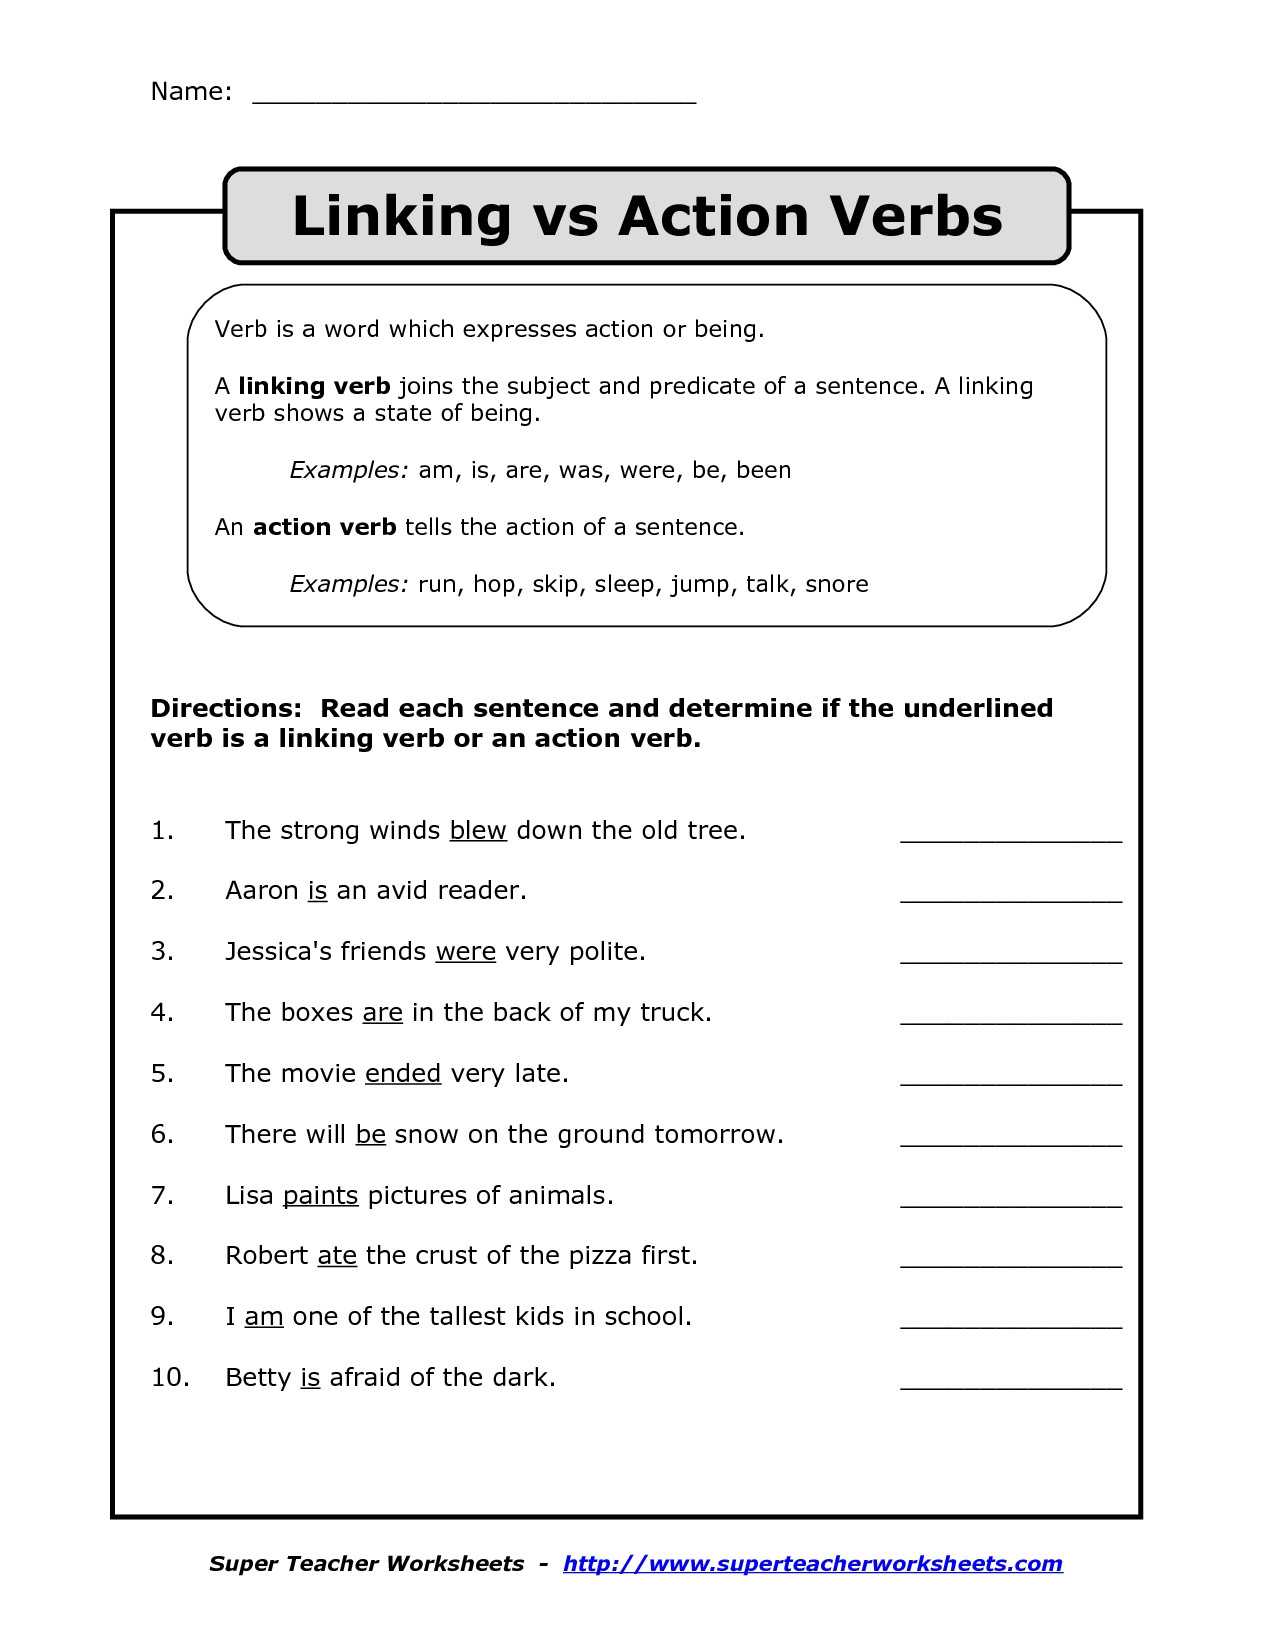 Spanish Verb Conjugation Practice Worksheets Along with Crossword Grid Printable Fresh Lovely Puzzle Verbs Concept Beautiful